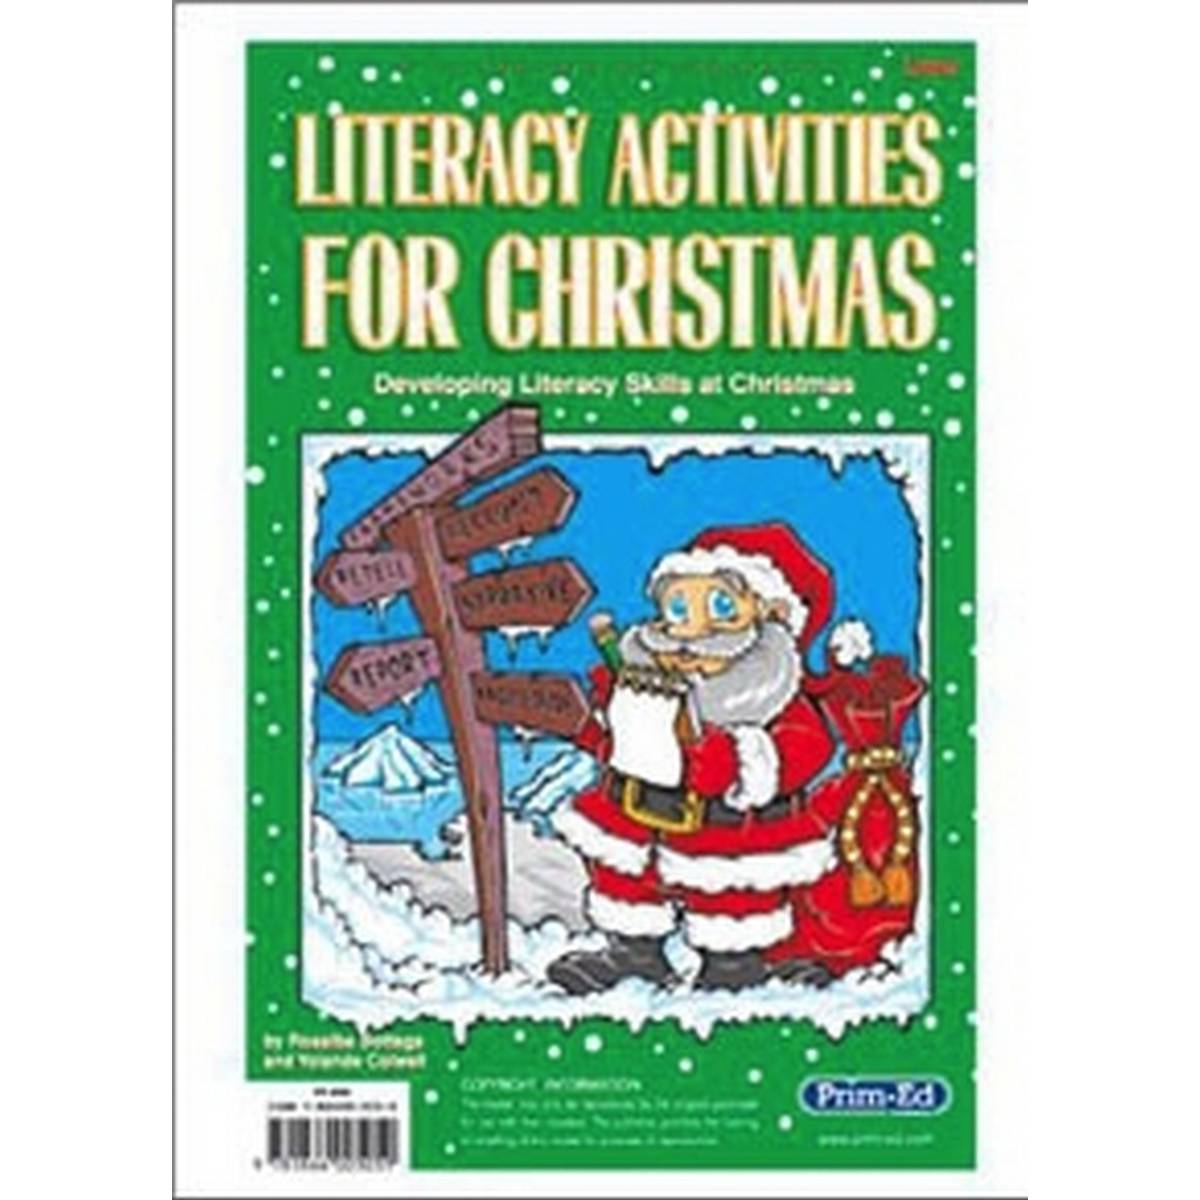 Literacy Activities for Christmas